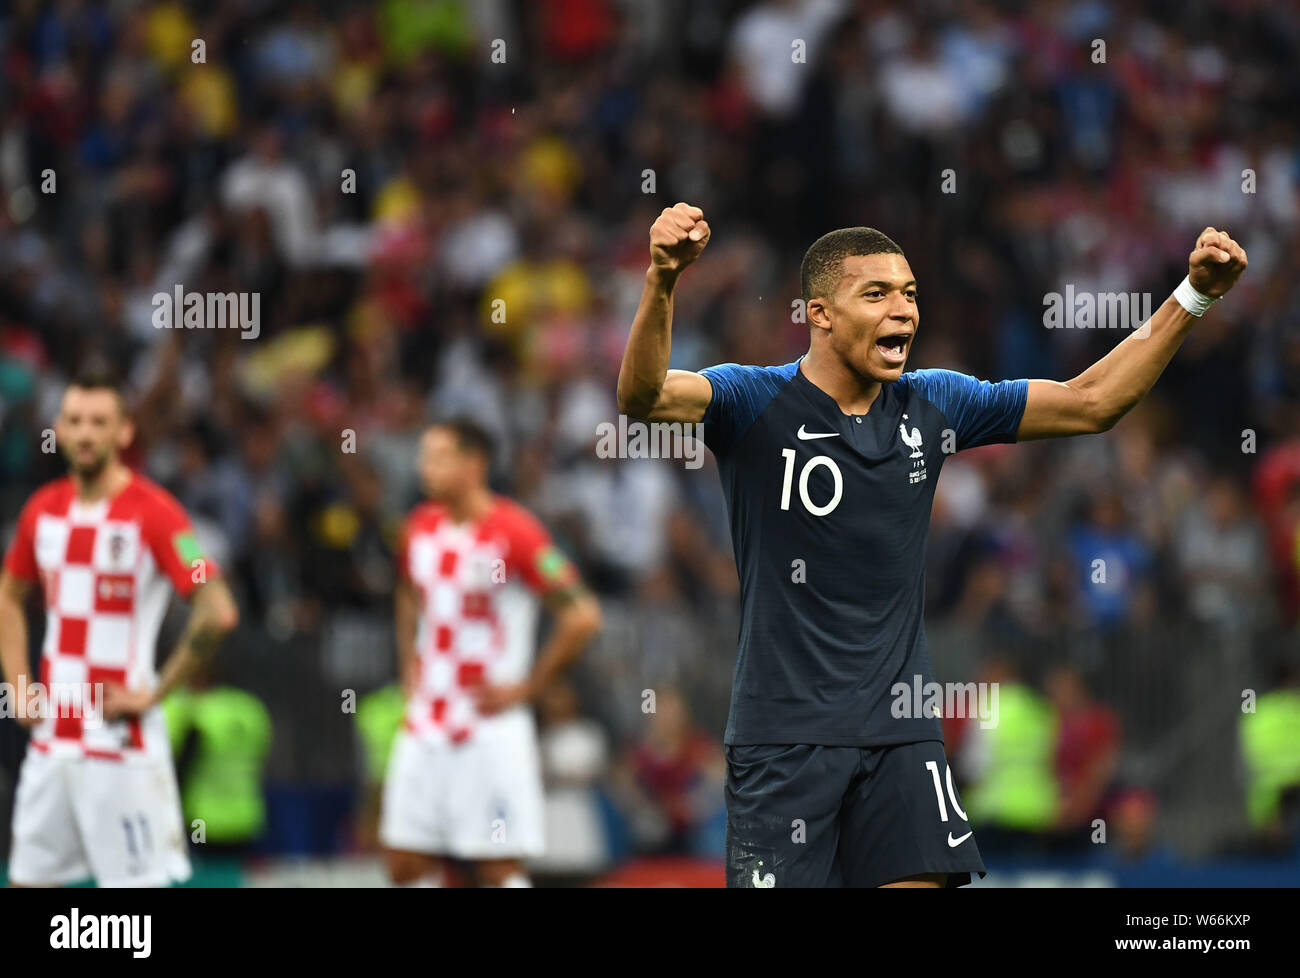 Kylian Mbappe of France celebrates after scoring a goal against Croatia in their final match during the 2018 FIFA World Cup in Moscow, Russia, 15 July Stock Photo